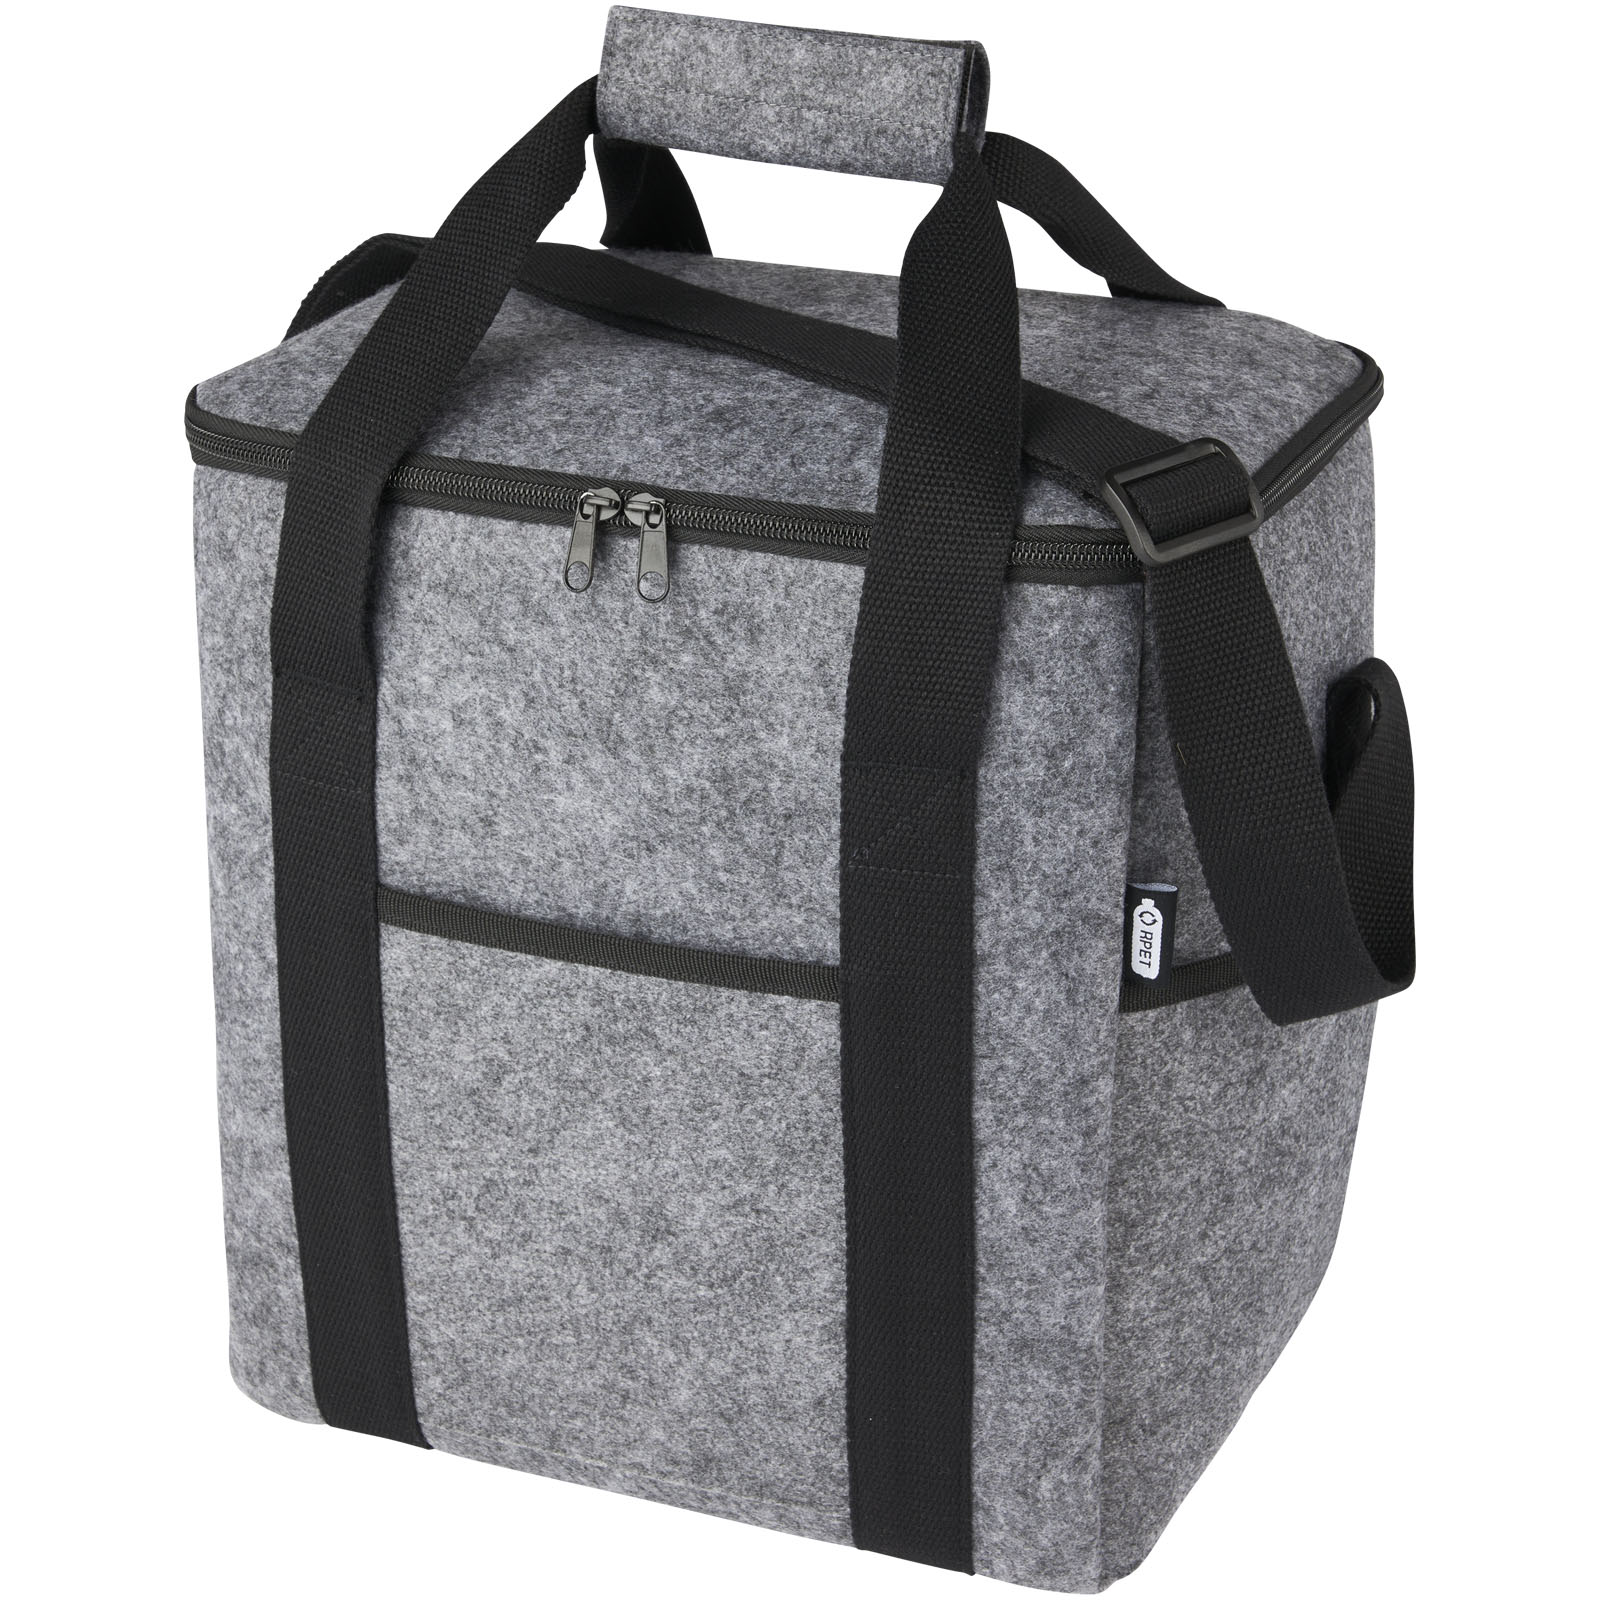 Recycled Felt Cooler Bag - High Halstow - Abbots Worthy